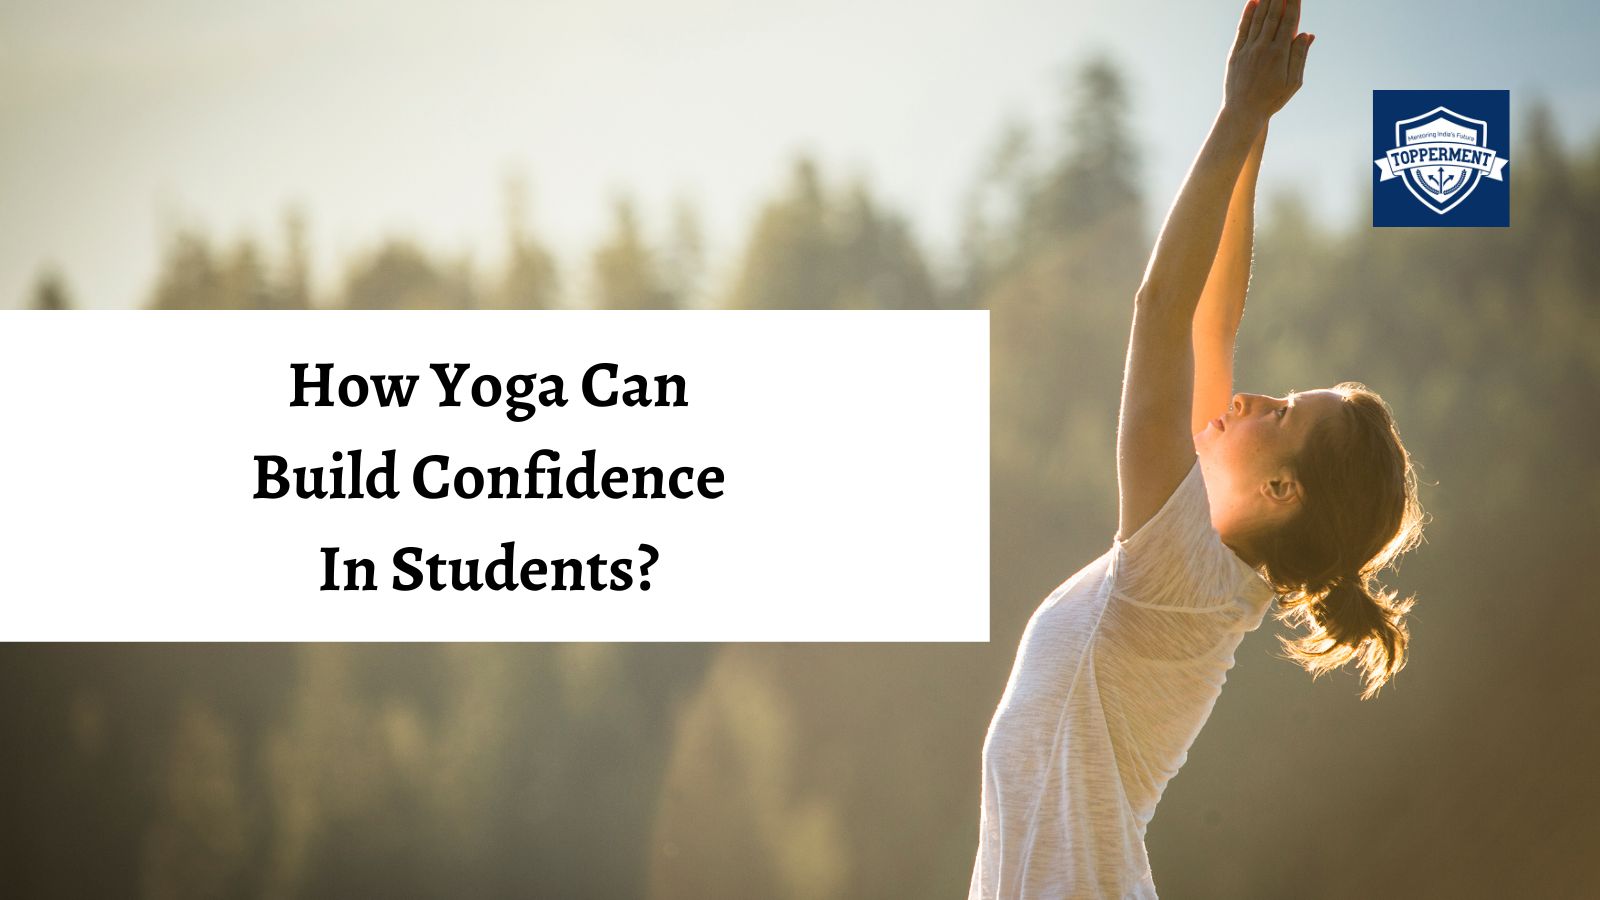 How Yoga Can Build Confidence in students? | Best UPSC IAS Coaching For Mentorship And Guidance